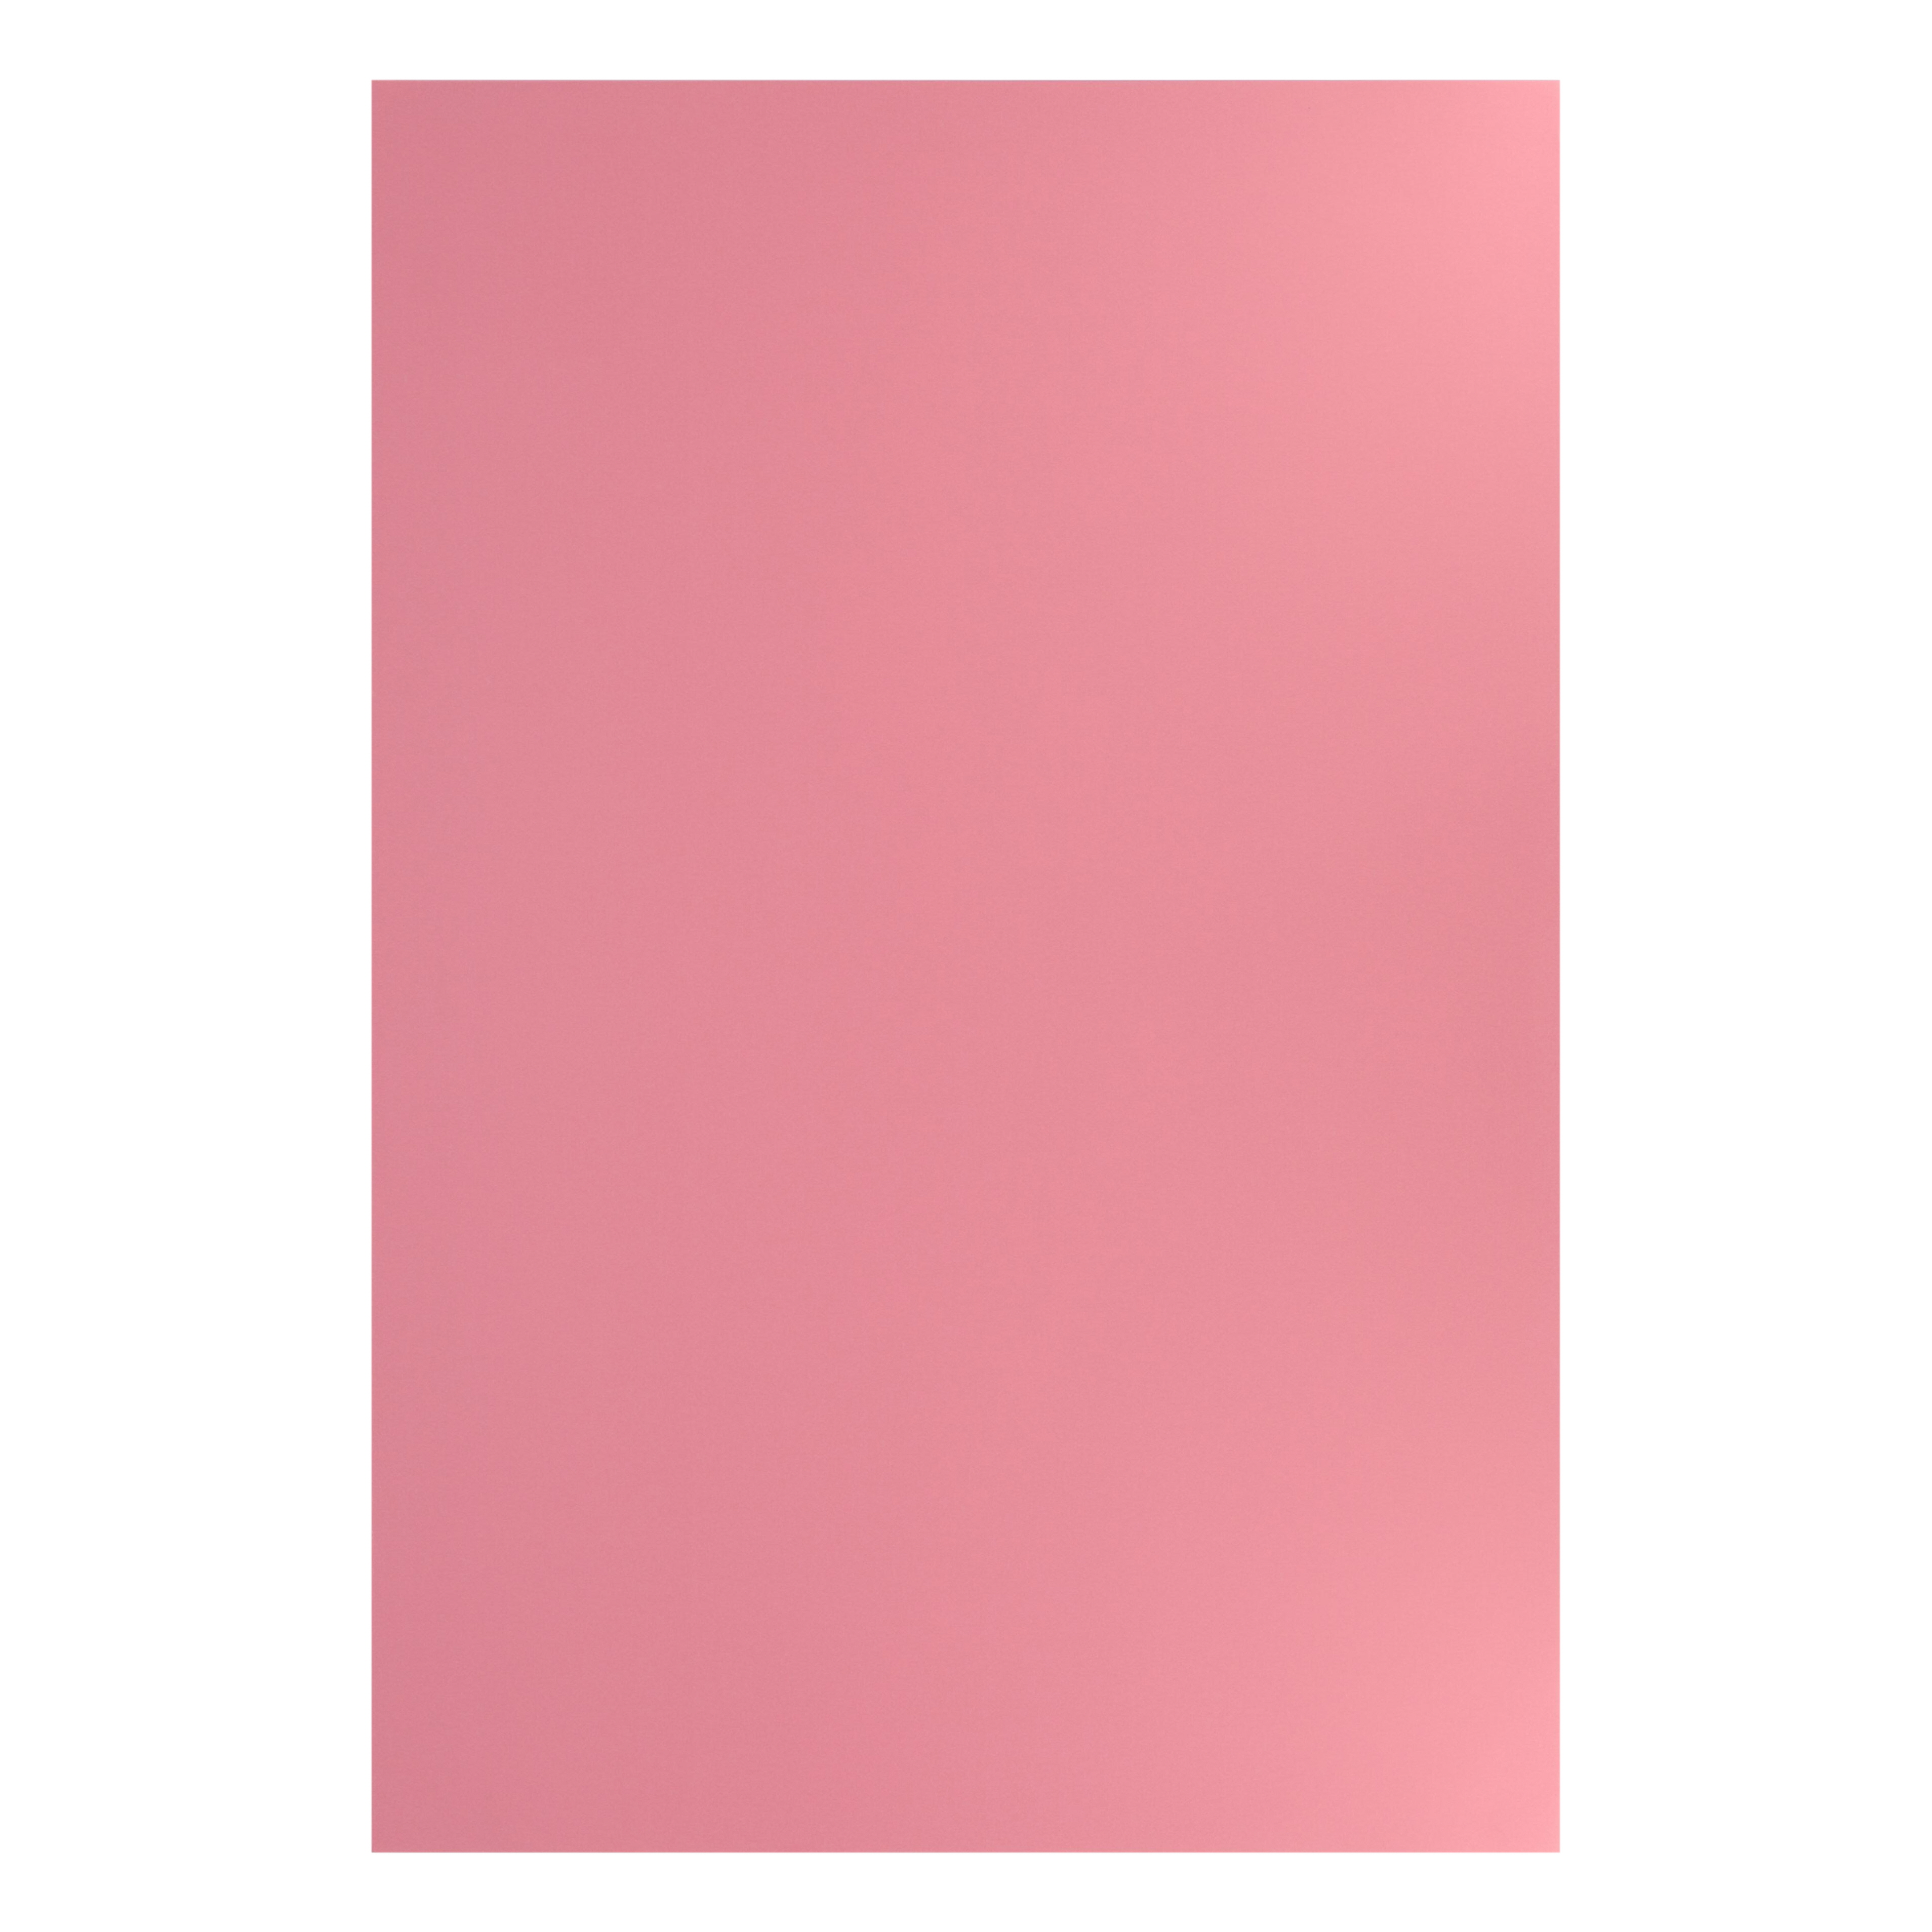 Cmate Smooth Coloured Paper Pink x100